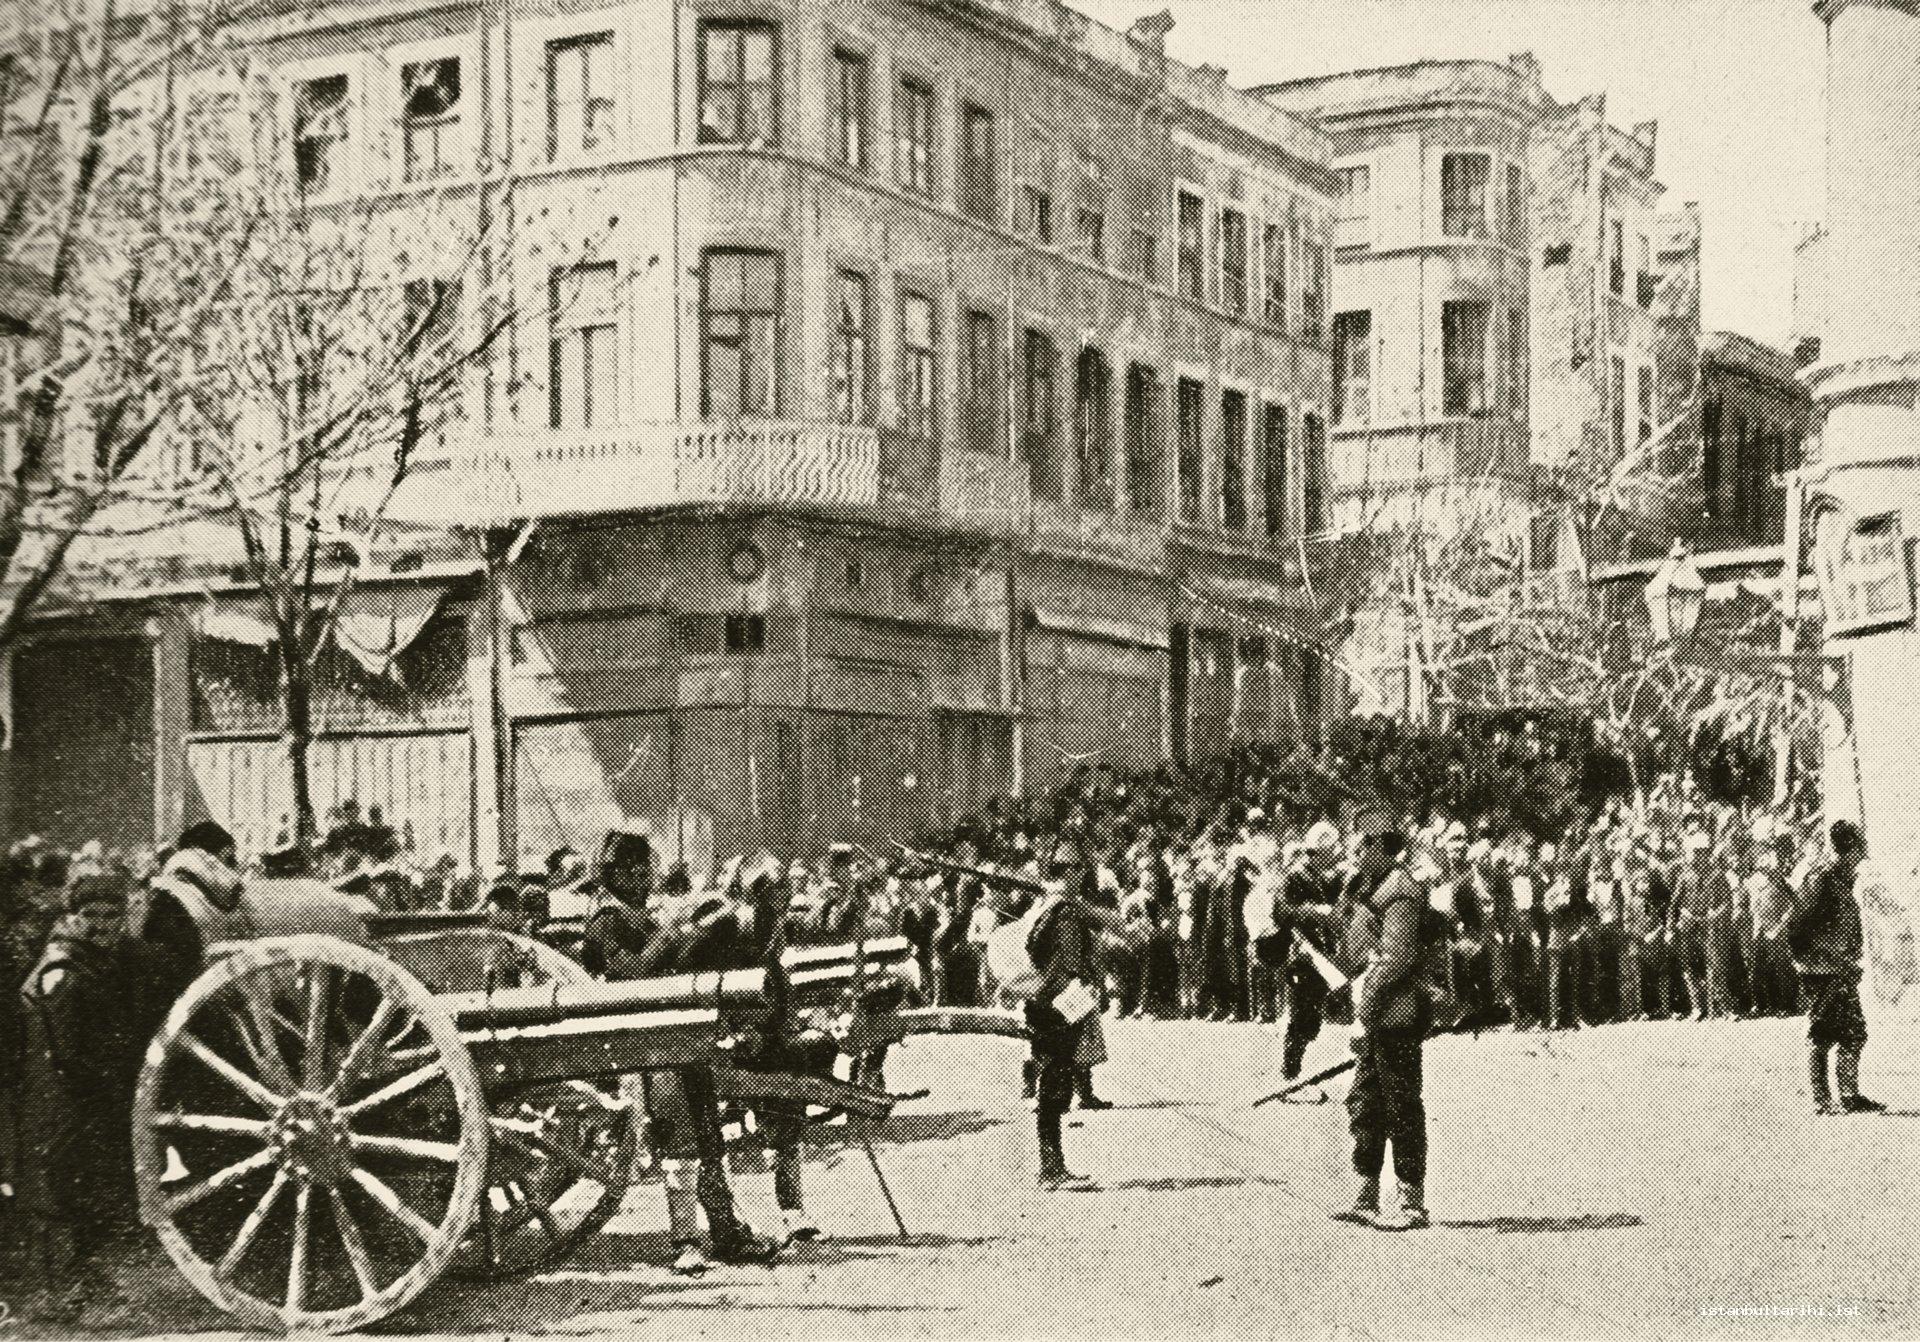 36- The Action Army in the streets of Istanbul, d. The artillery units of the Action Army (<em>Resimli Kitap</em>)